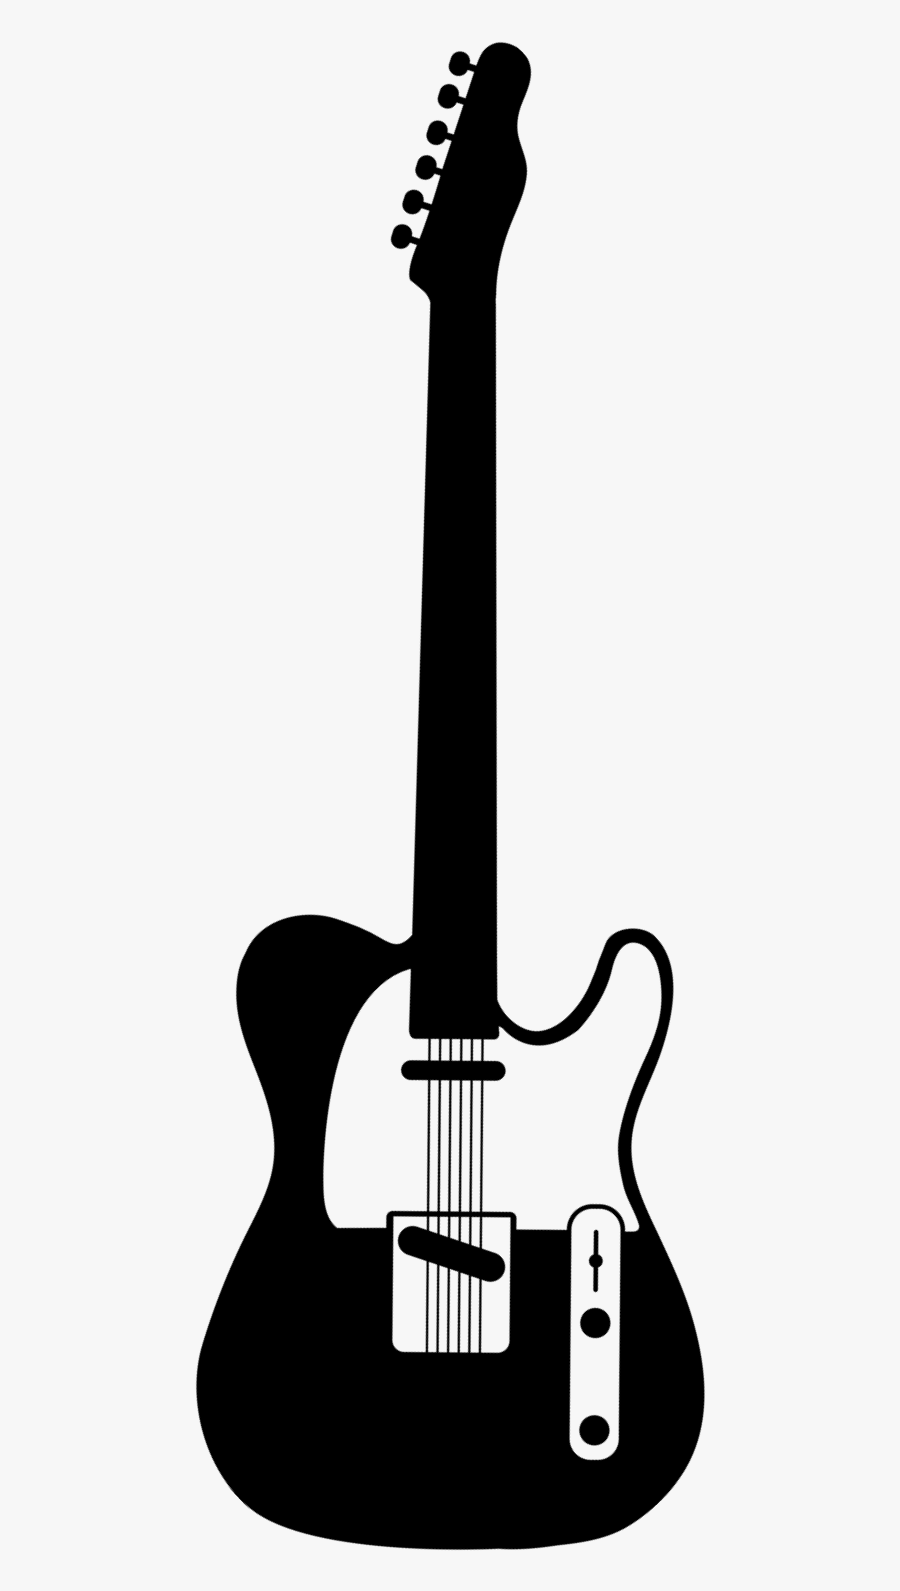 Download Electric Guitar Silhouette : Choose from over a million ...